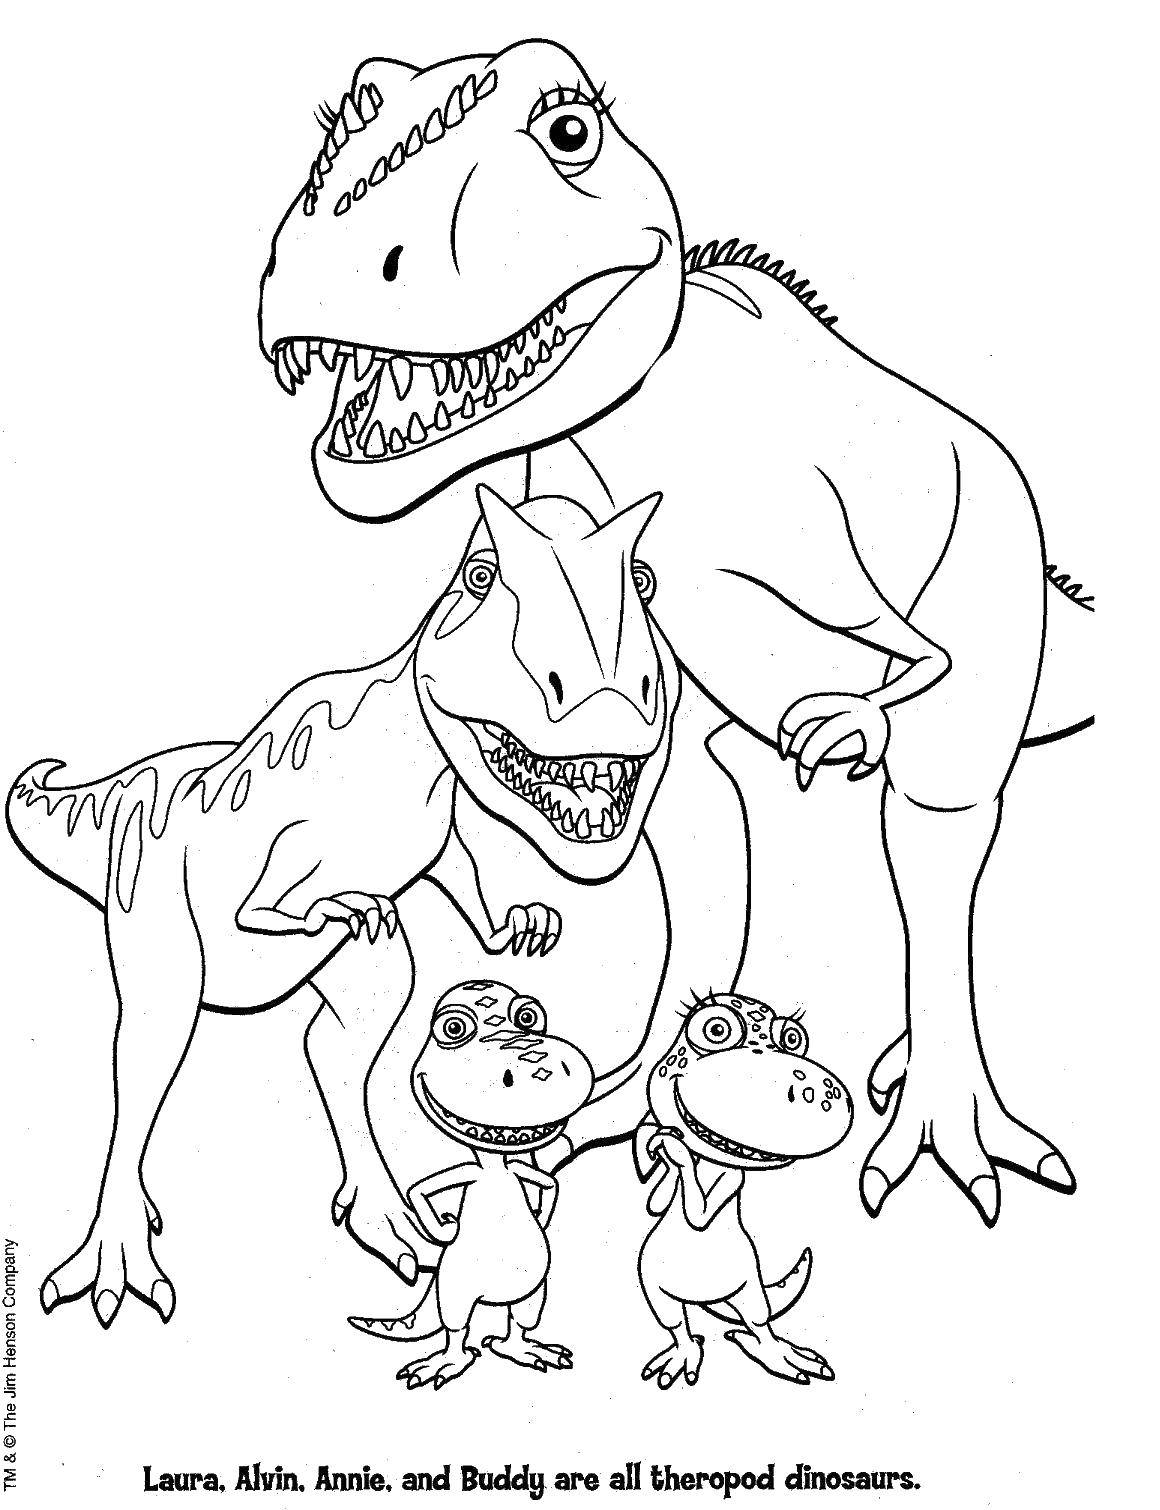 Coloring Family dinosaurs. Category Jurassic Park. Tags:  Dinosaurs.